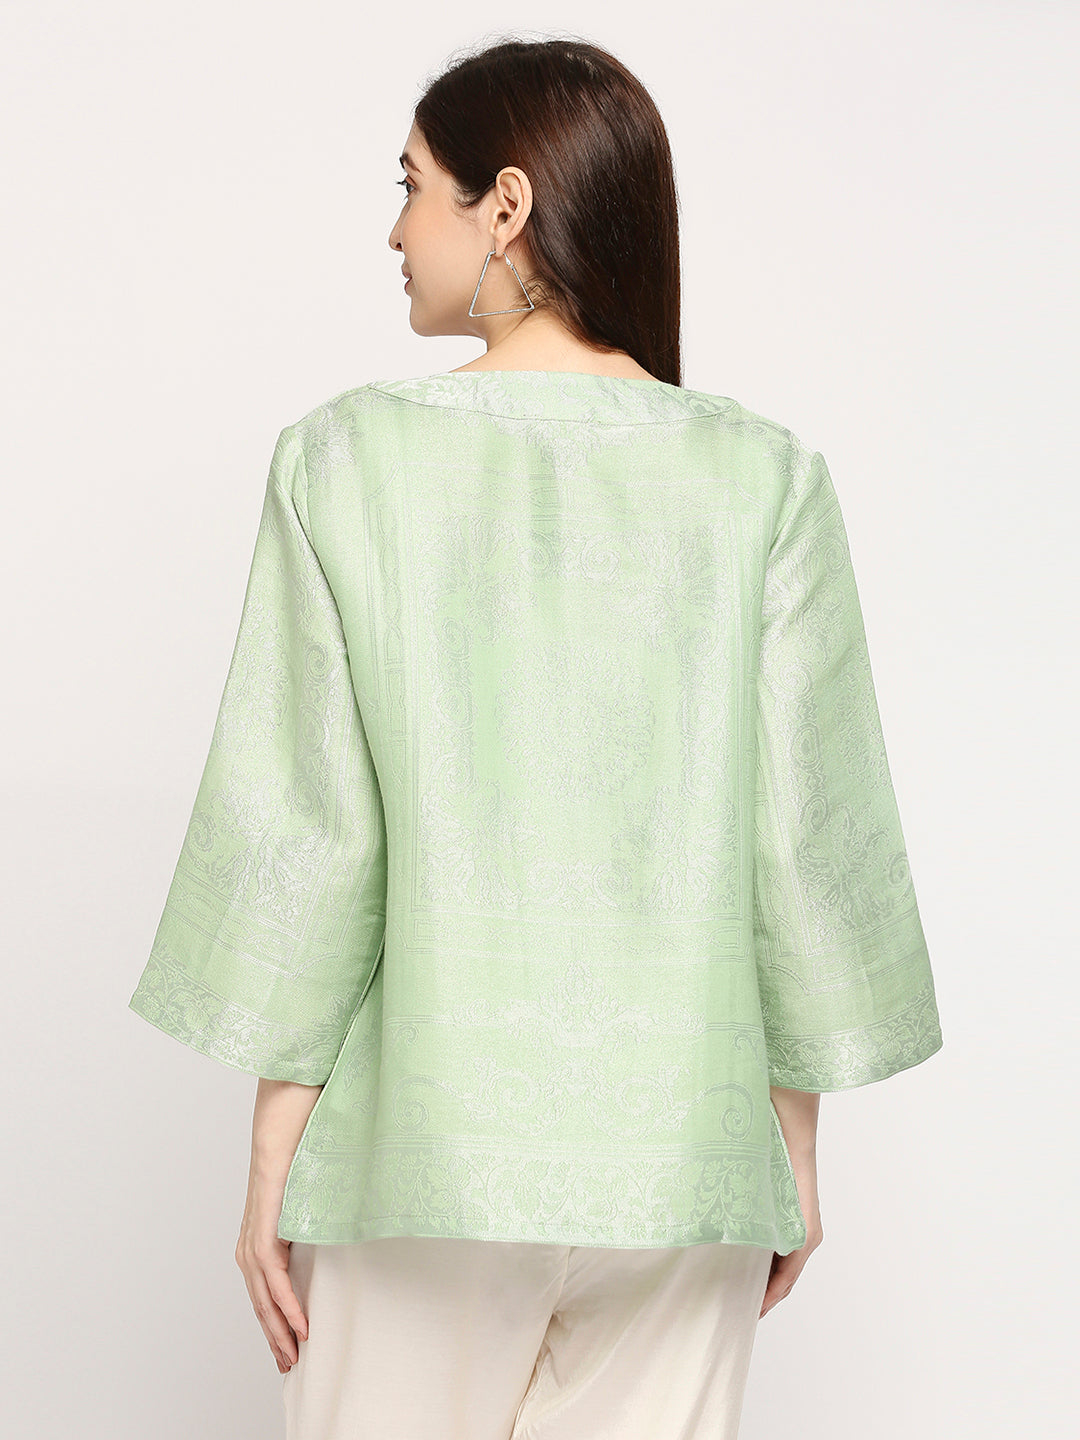 Brocade Green French Patterned Jacket